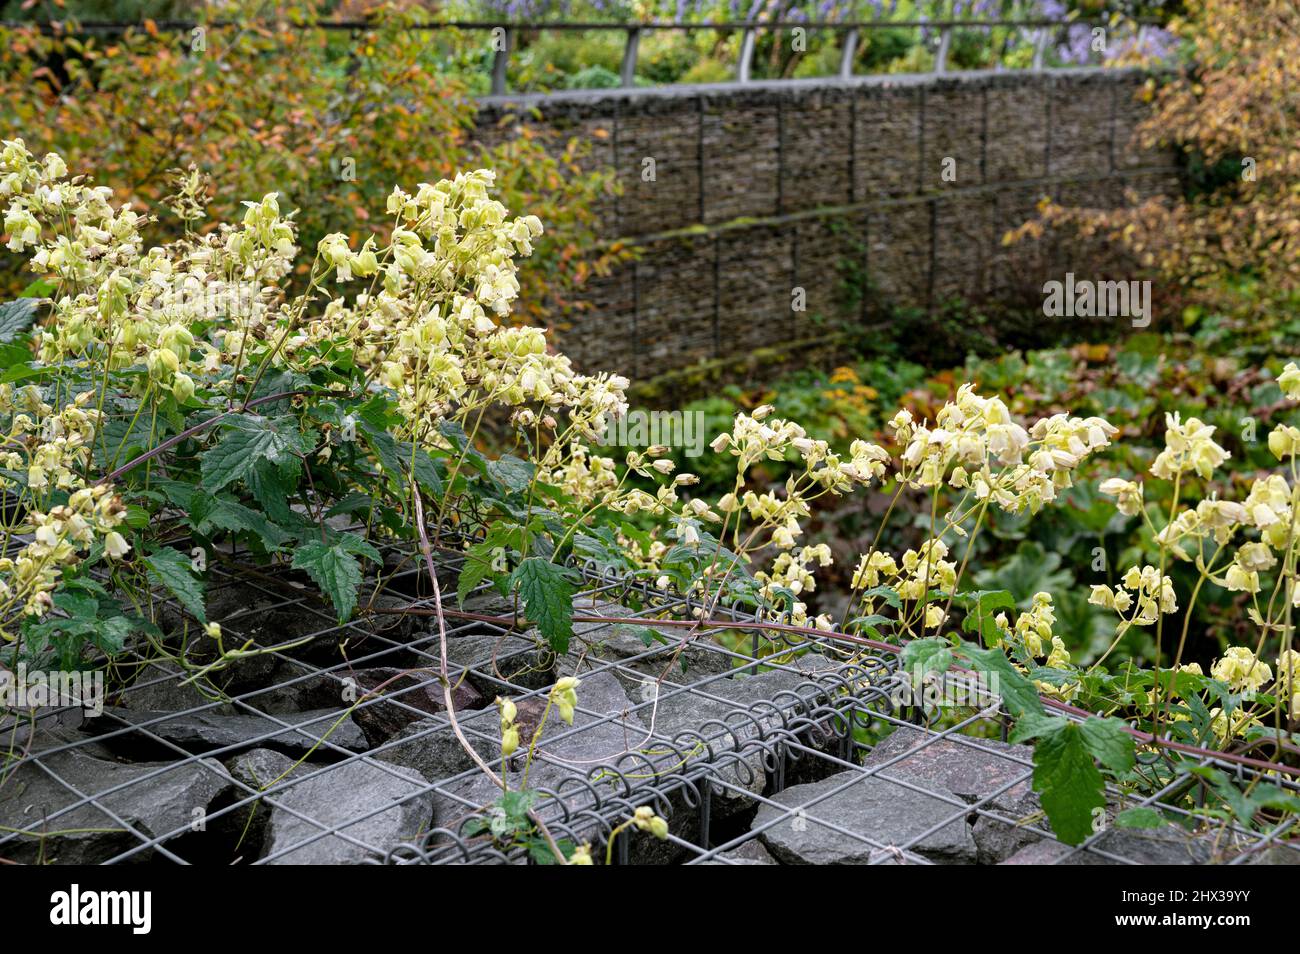 Clematis Rehderiana, Nodding Virgins bower, Clematis nutans Becket. Climbing up and over a gabion wall. Stock Photo